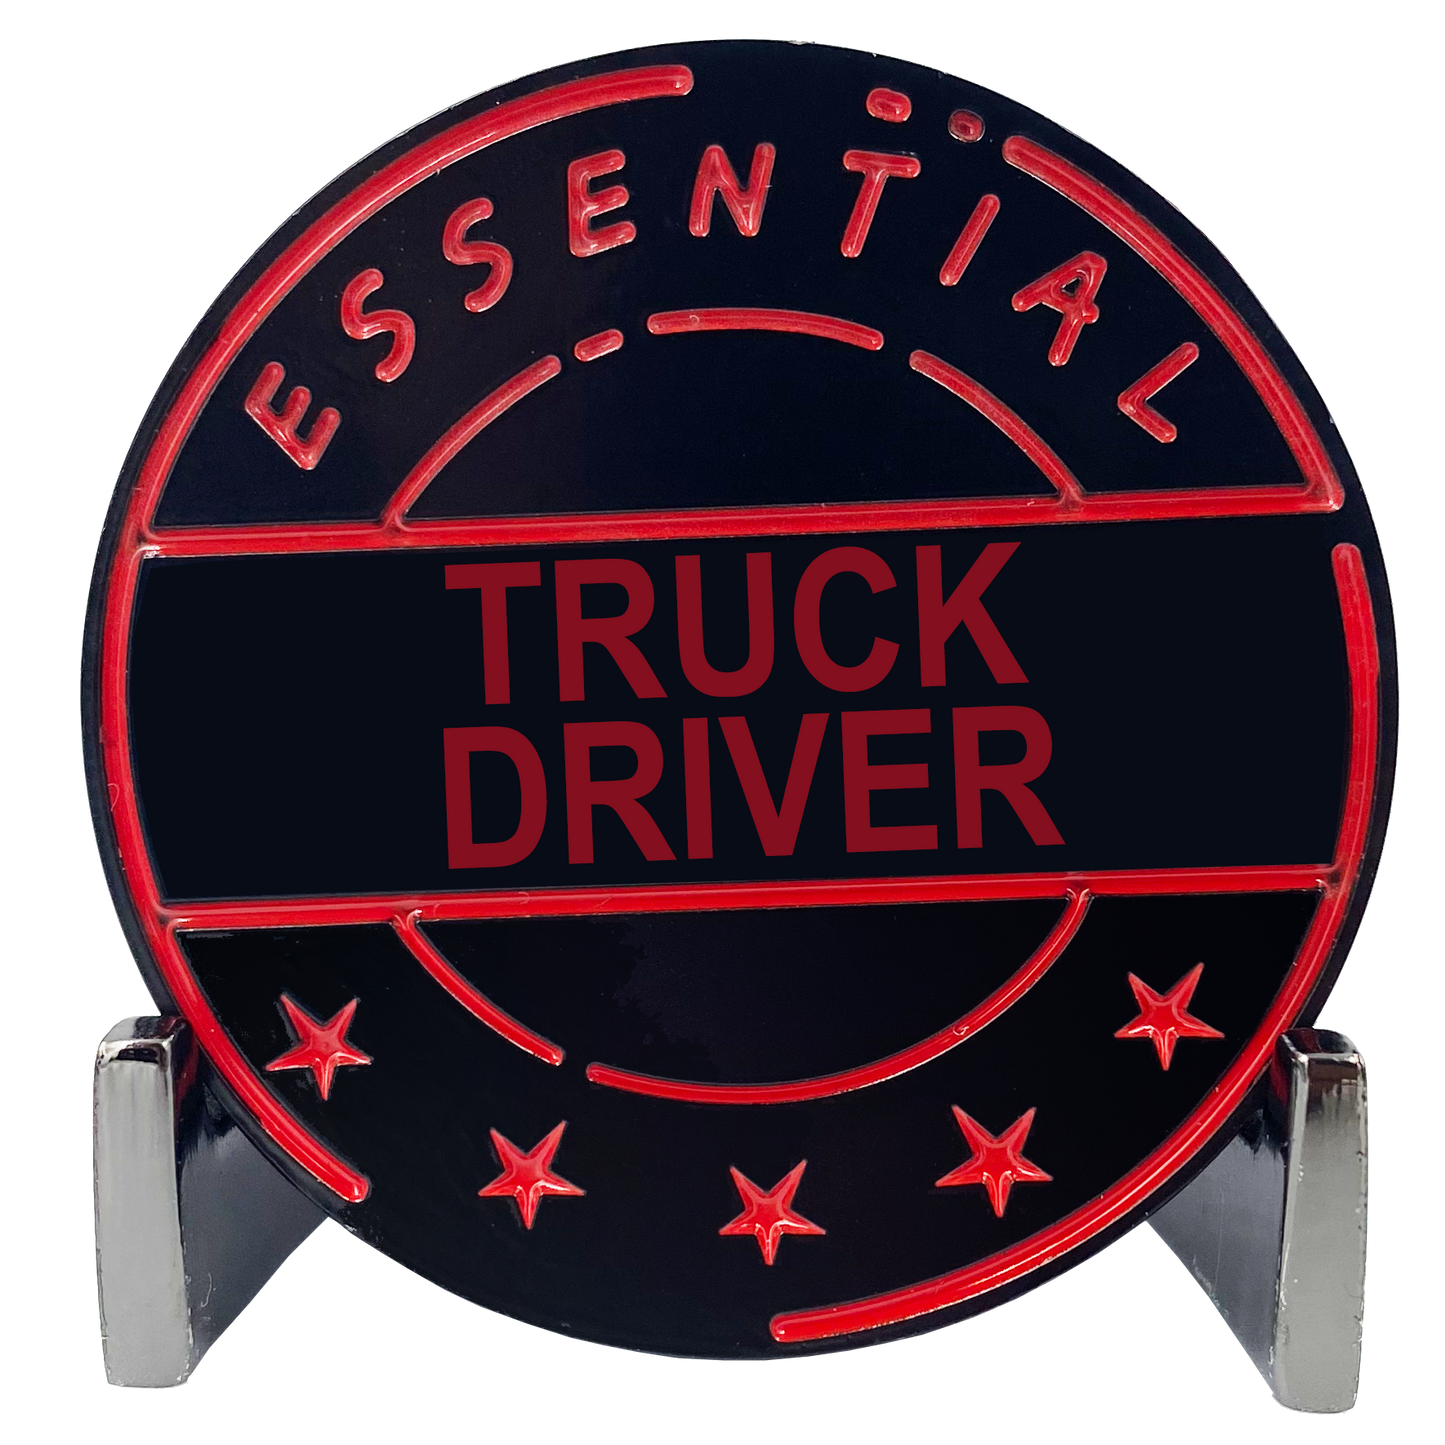 CL7-16 Essential Workers Truck Driver Challenge Coin perfect for Father's Day or Teamsters Birthday